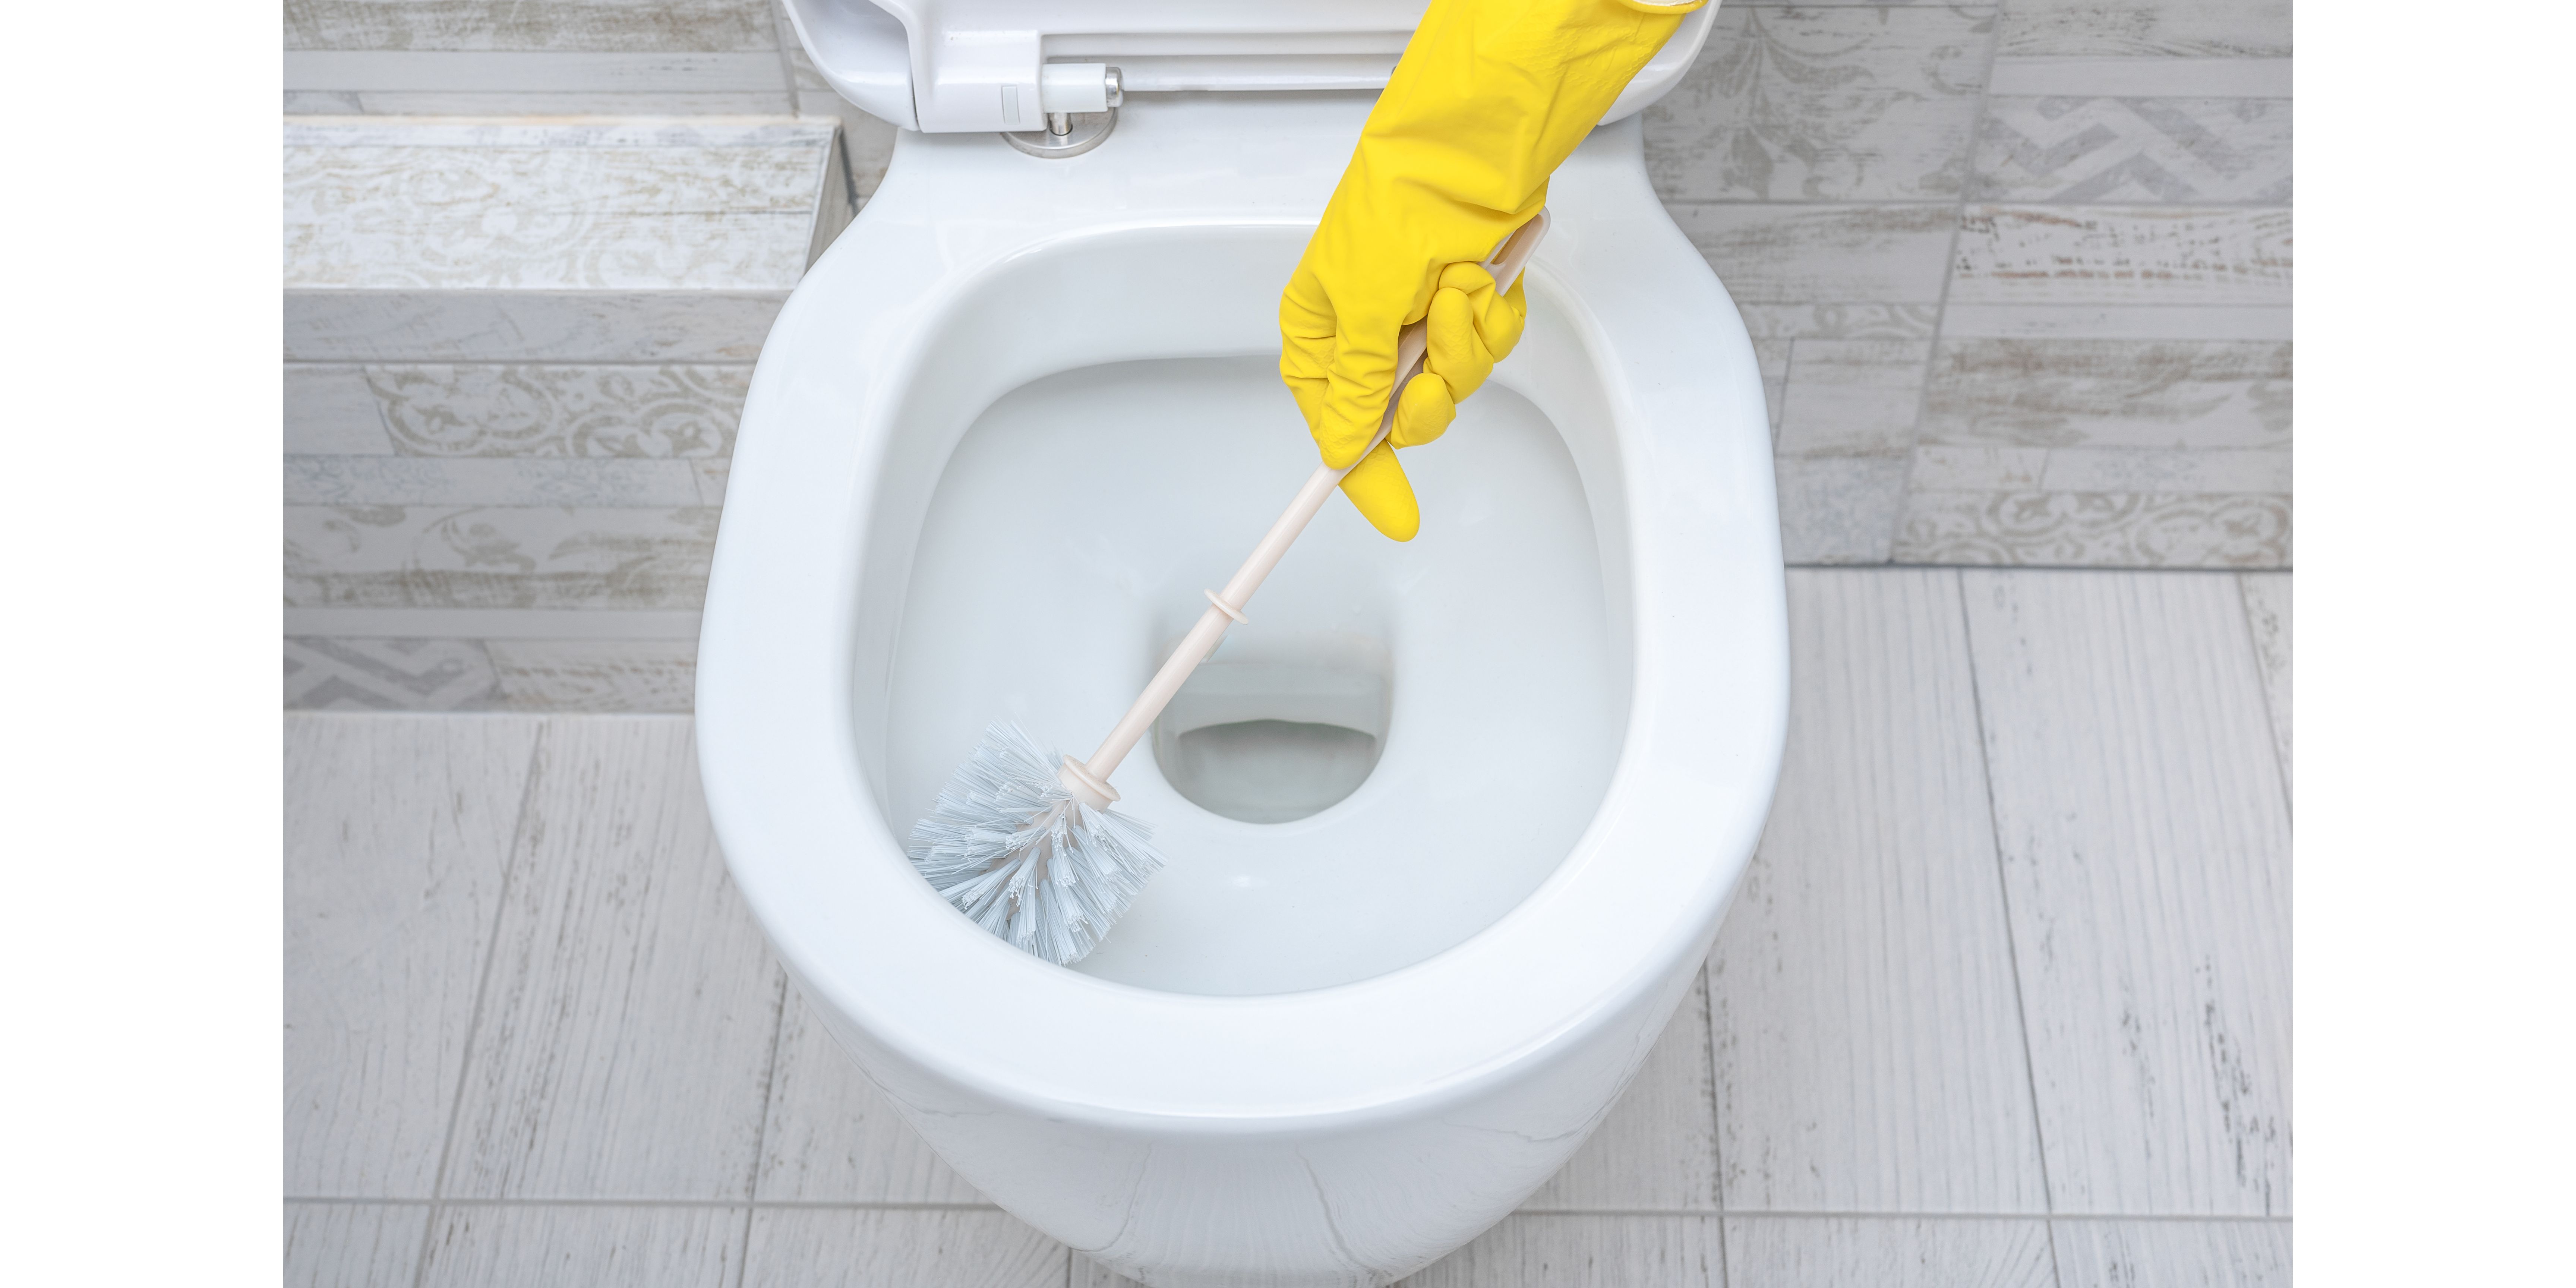 deep cleaning service cleaning wc professional cleaner washing toilet brush up toilet for cleanliness and hygiene cleaning toilet bowl toilet scrubbing